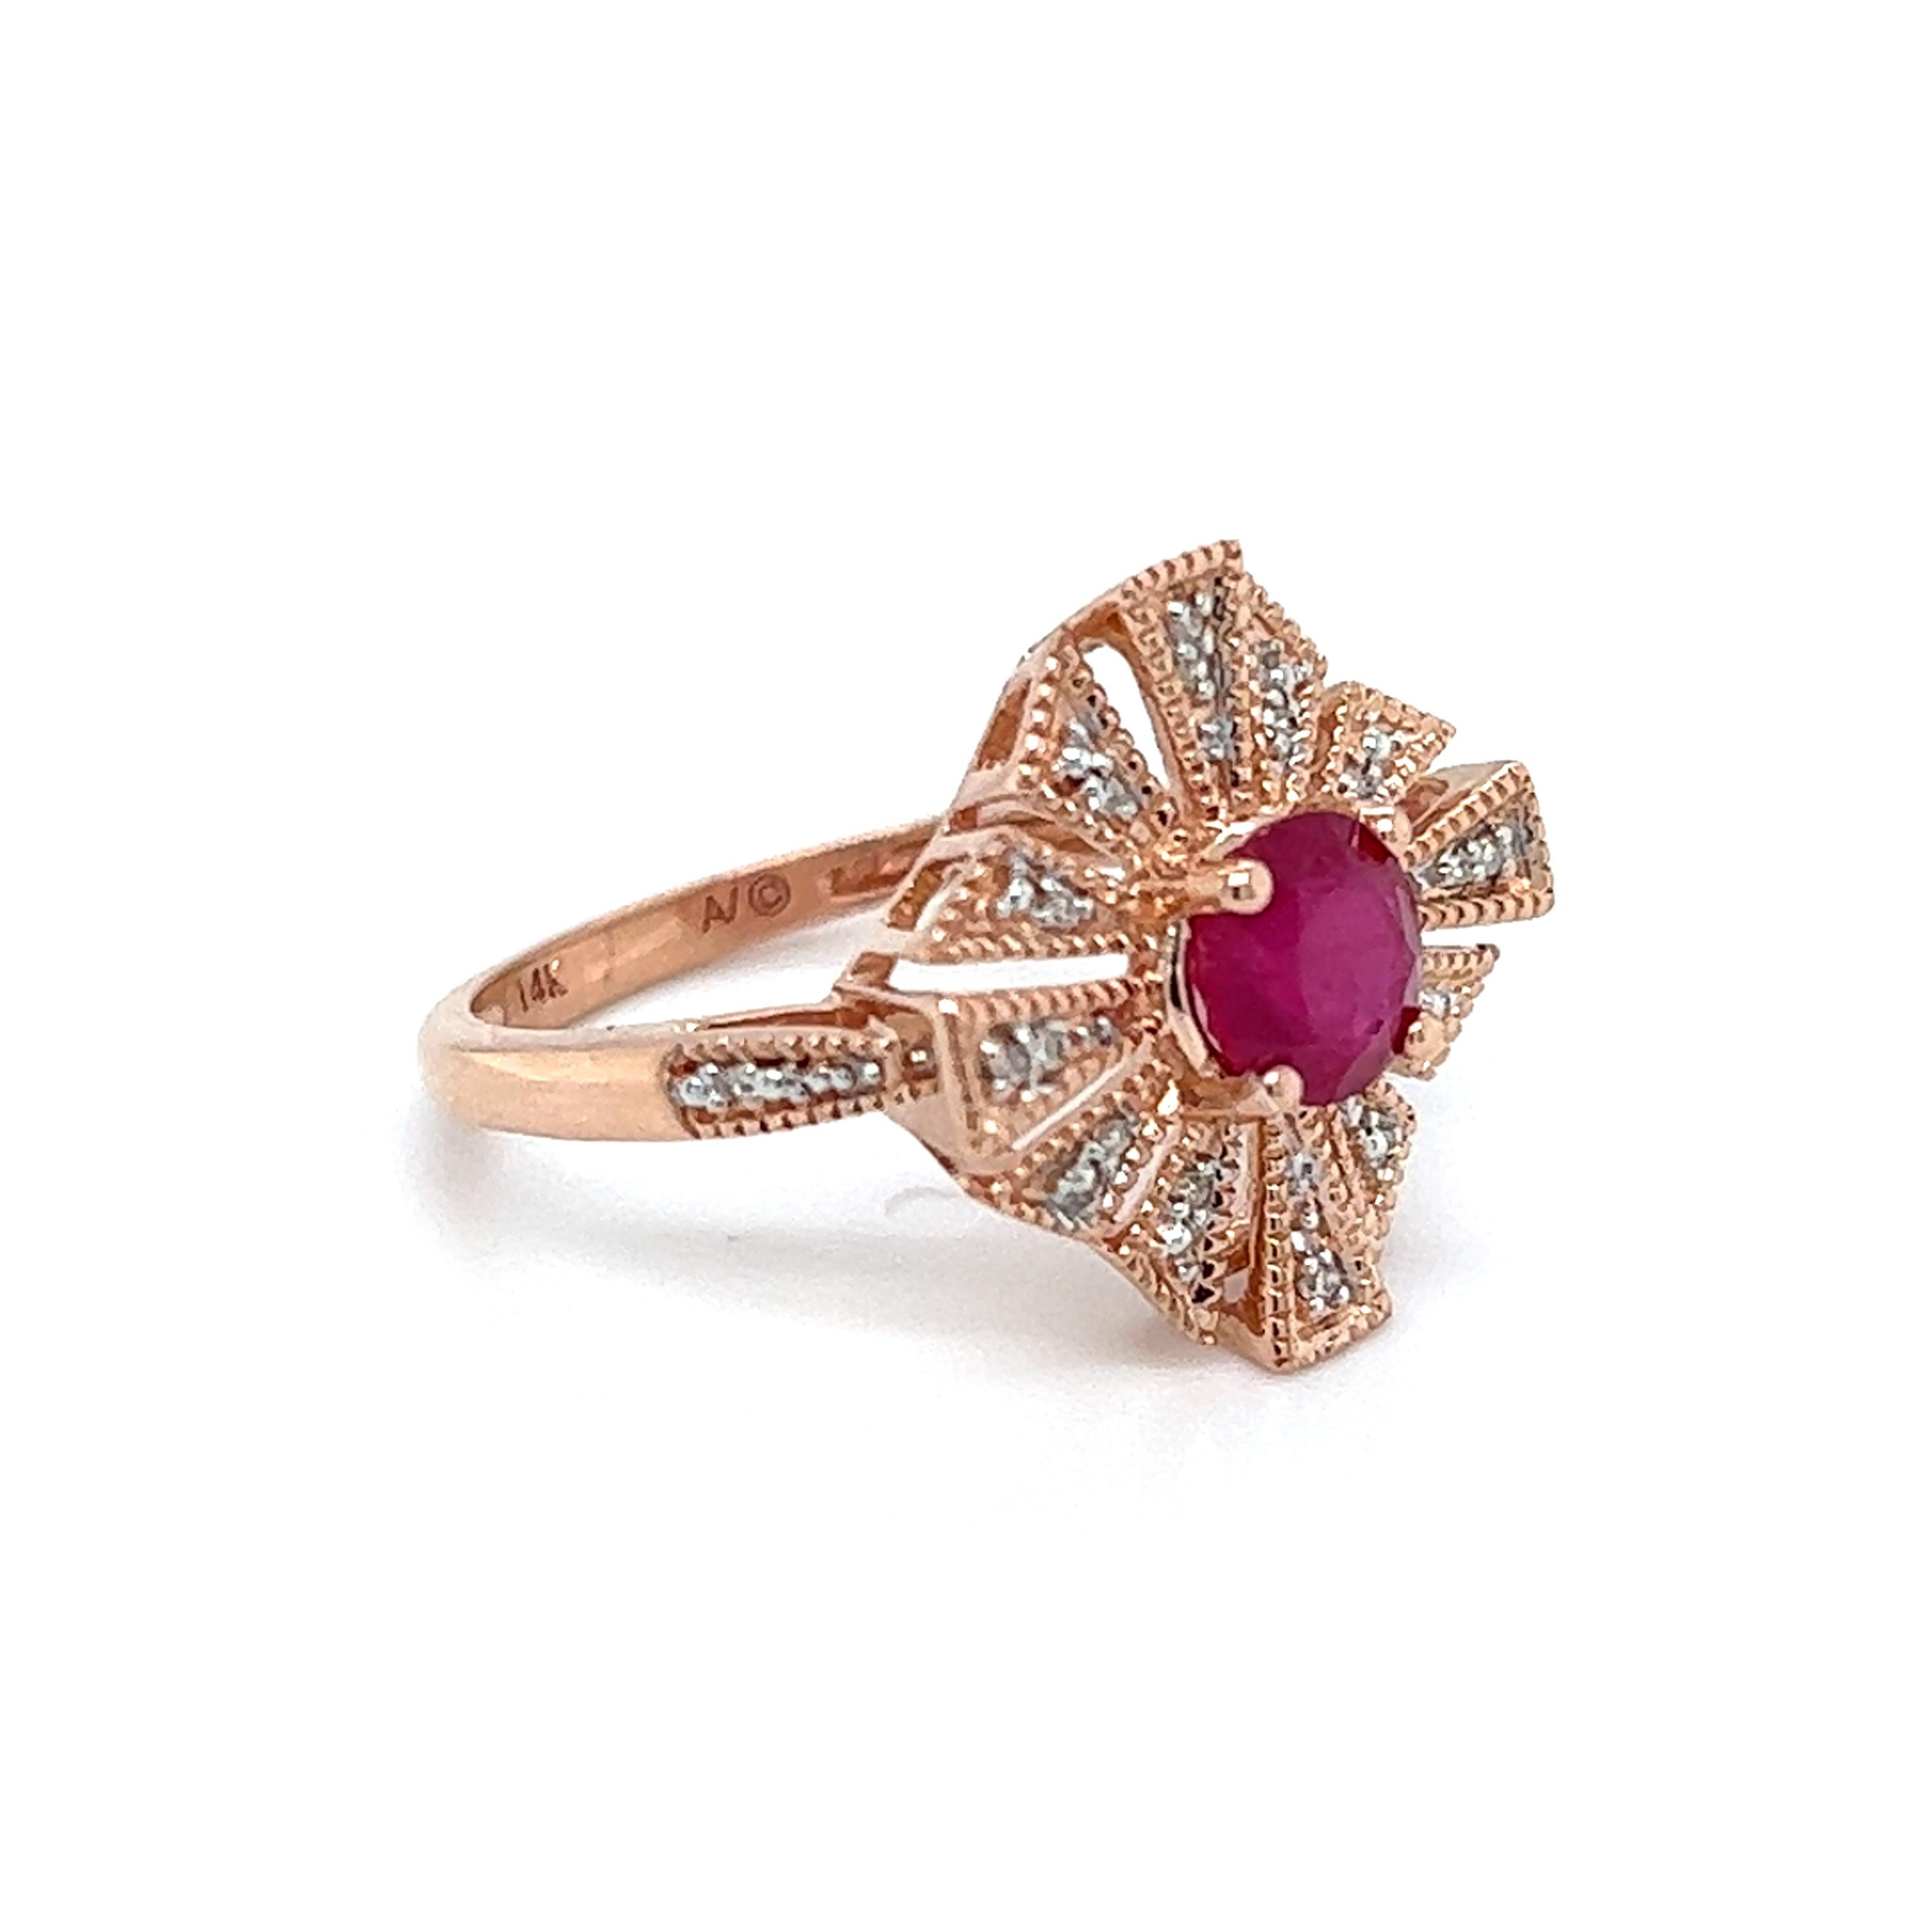 One 14-karat rose gold ring set with one 6mm natural round ruby and twenty-eight round brilliant cut diamonds, approximately 0.20-carat total weight with matching H/I color and I1 clarity.  The ring is a finger size 6.75 and is resizable.  Sizing is